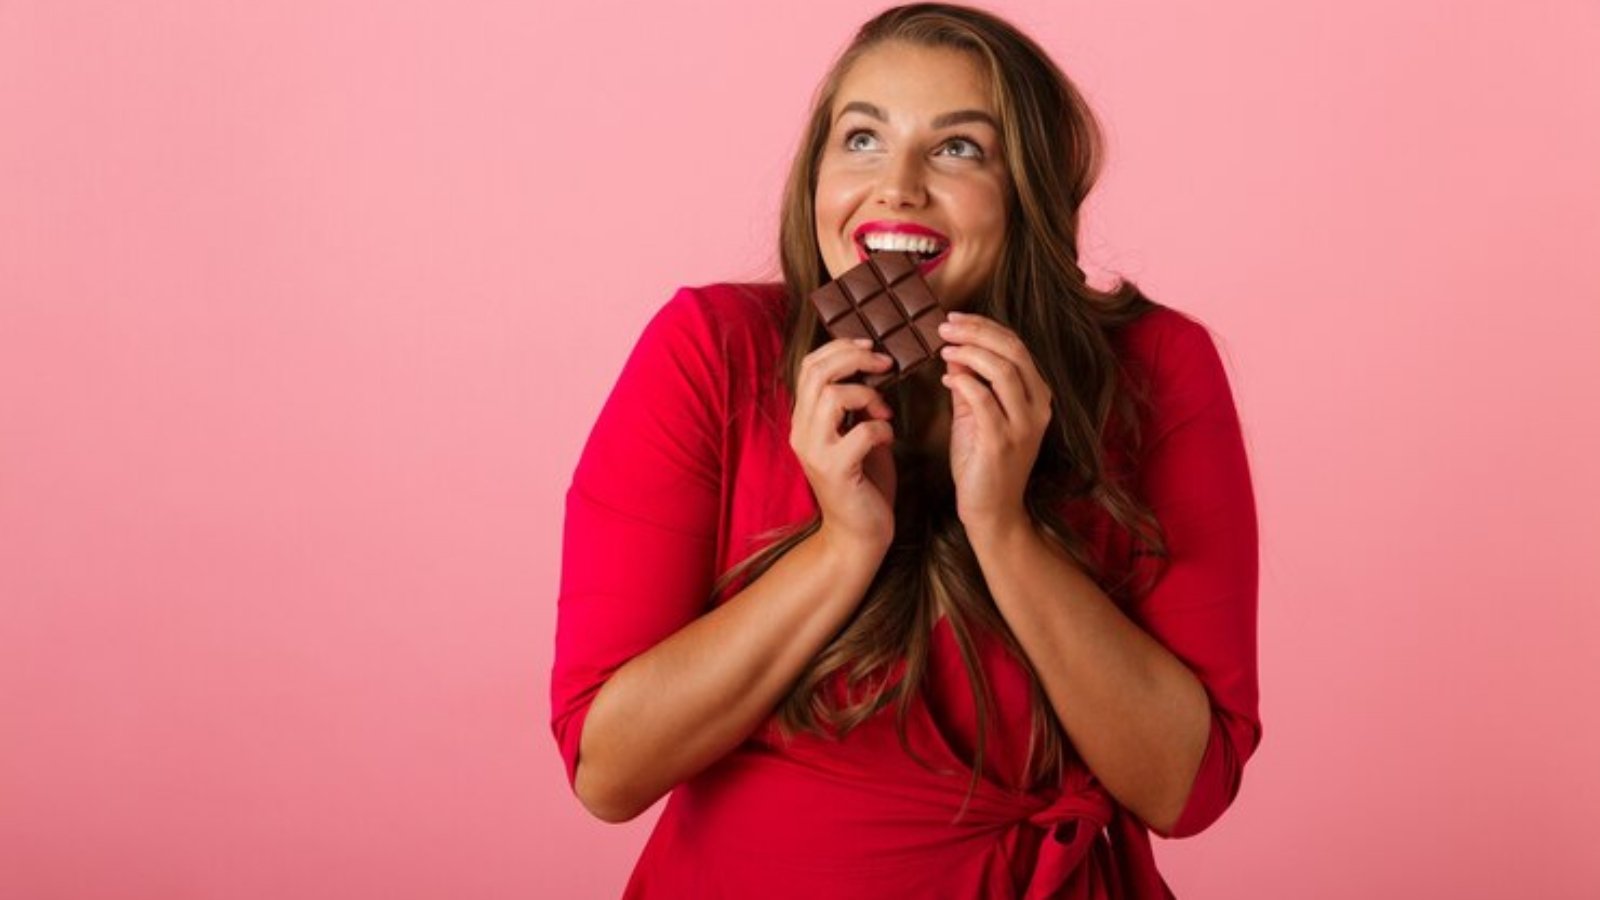 image-pretty-hungry-young-woman-isolated-pink-wall-holding-chocolate_171337-51469